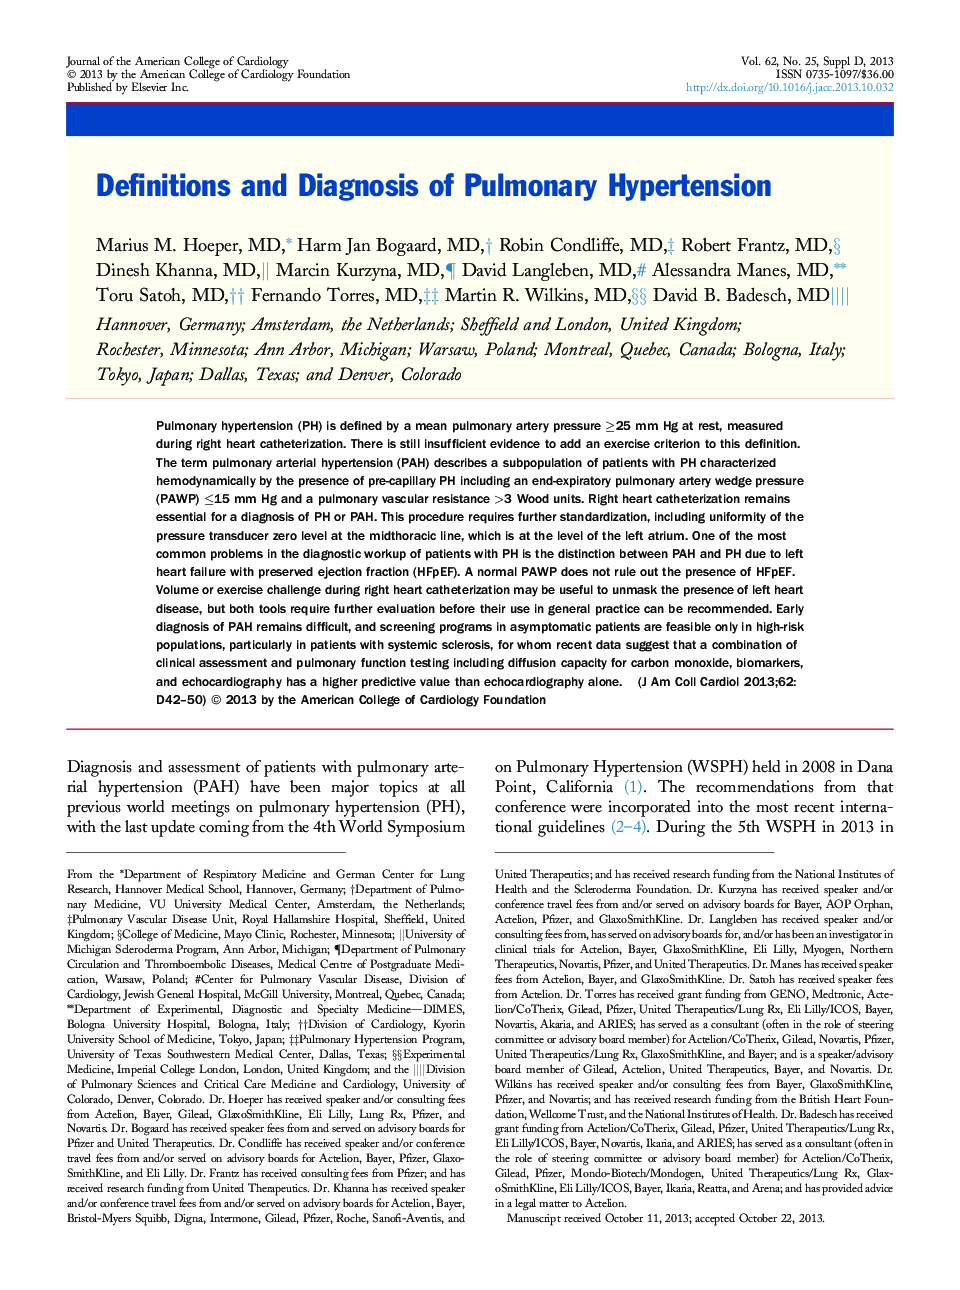 Definitions and Diagnosis of Pulmonary Hypertension 